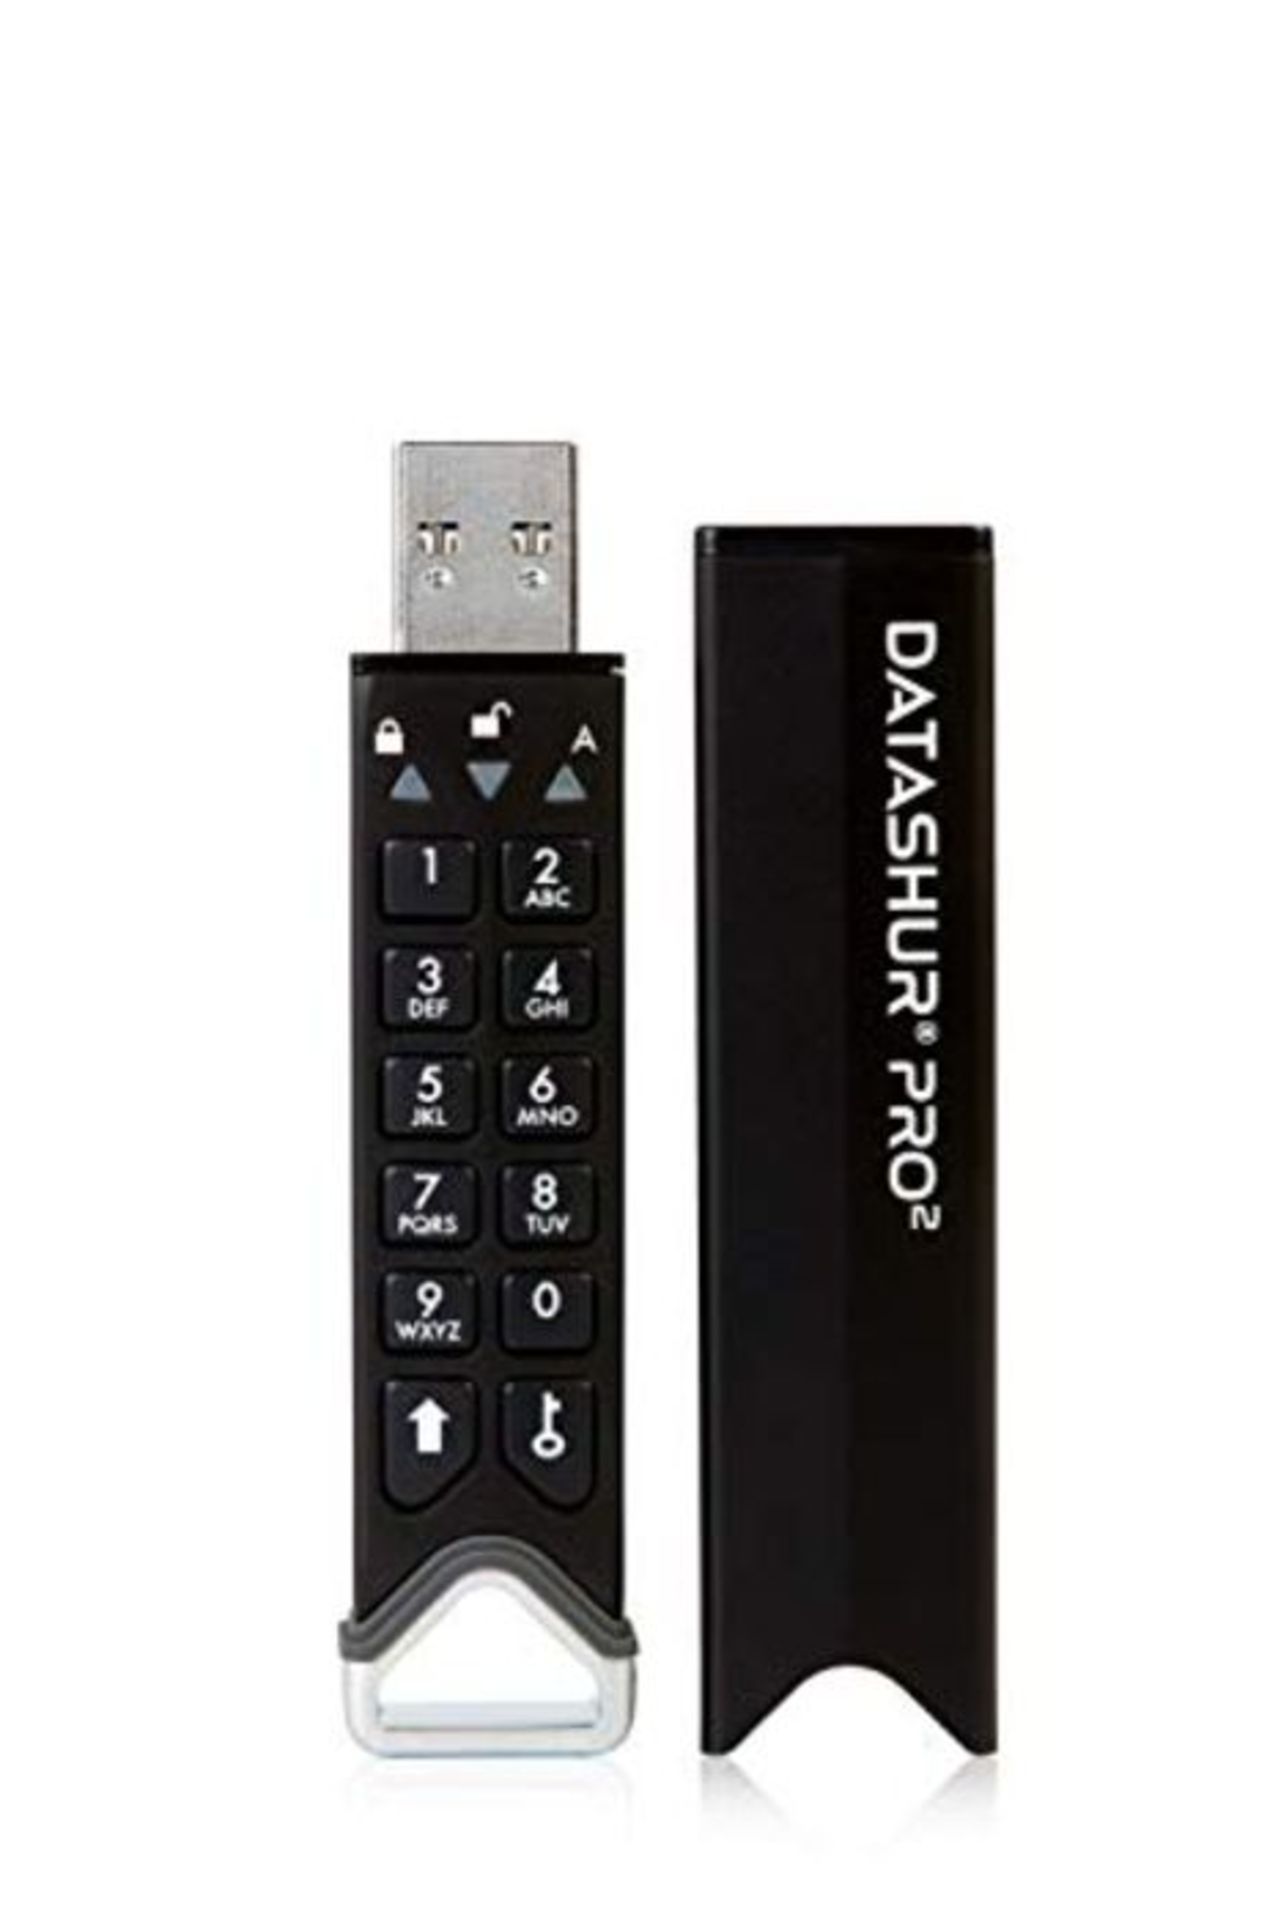 RRP £102.00 iStorage datAshur PRO² 16 GB Secure Flash Drive - FIPS 140-2 Level 3 Certified - Pass